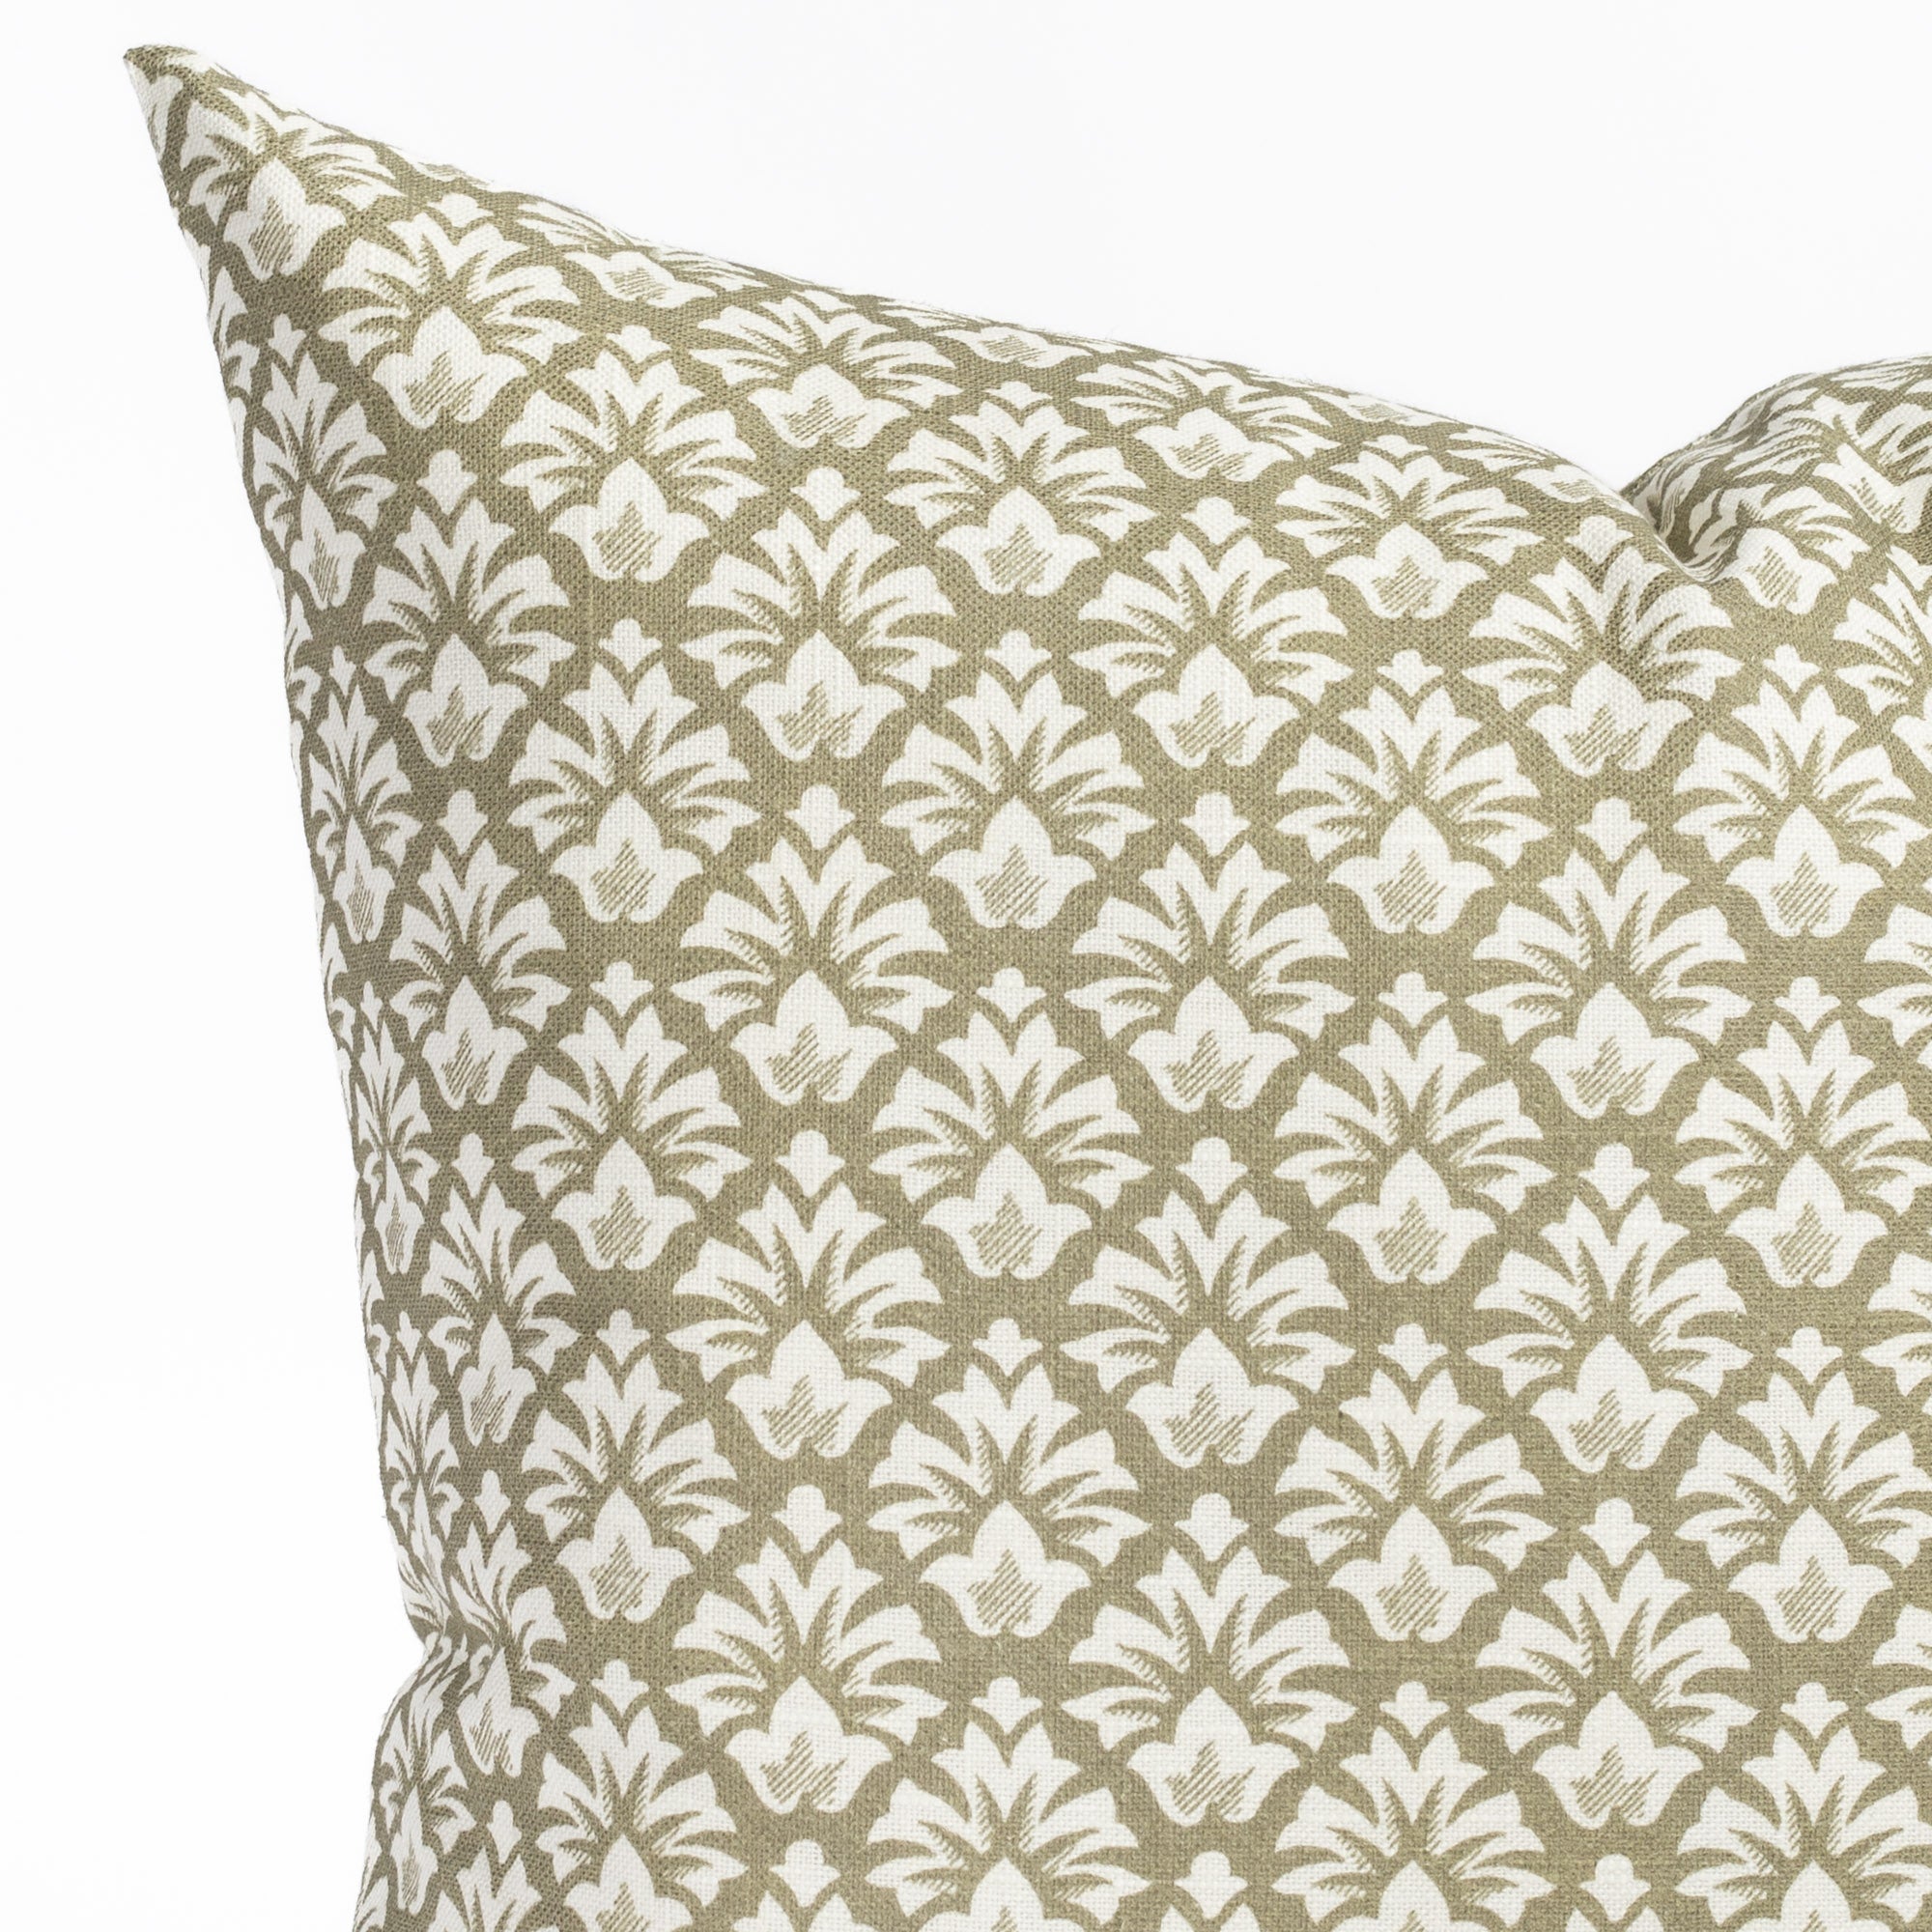 an olive green and cream floral block print throw pillow : close up detail view